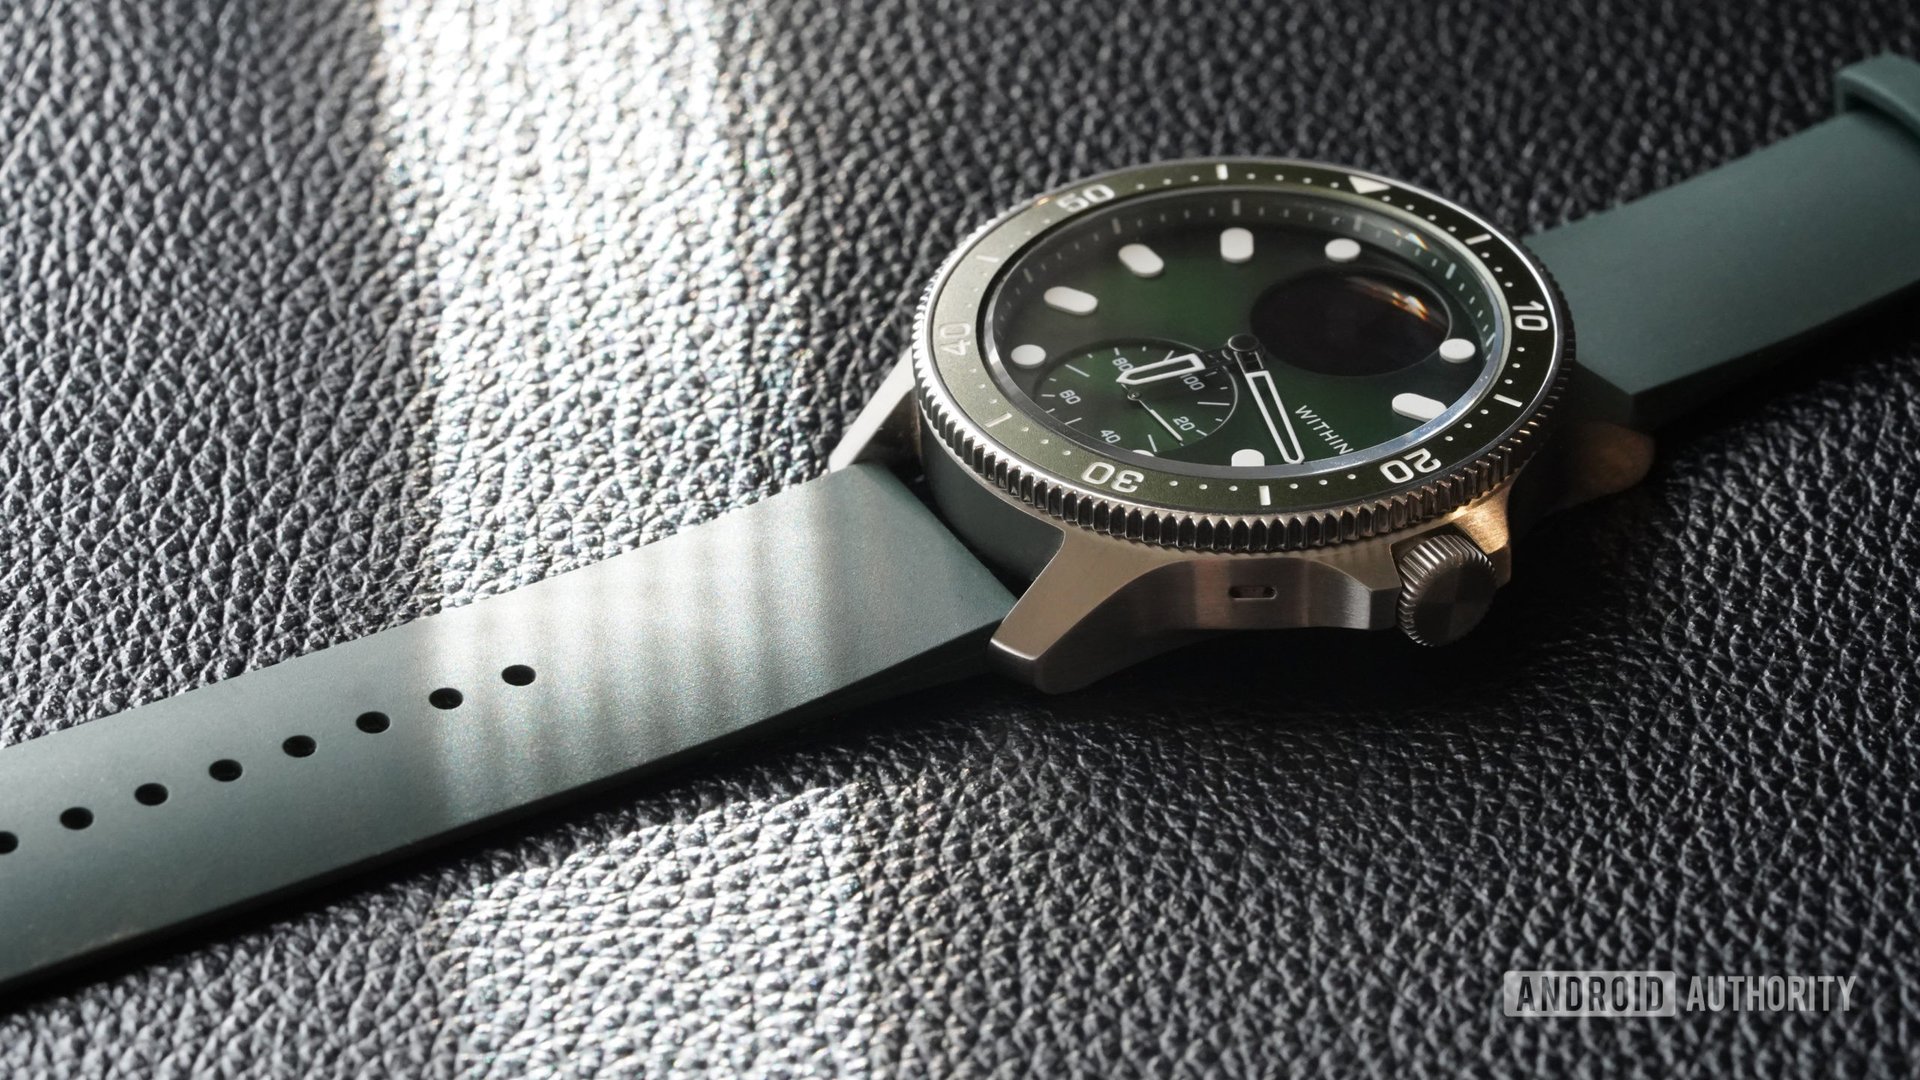 A Withings ScanWatch Horizon in Green rests on a black leather surface.